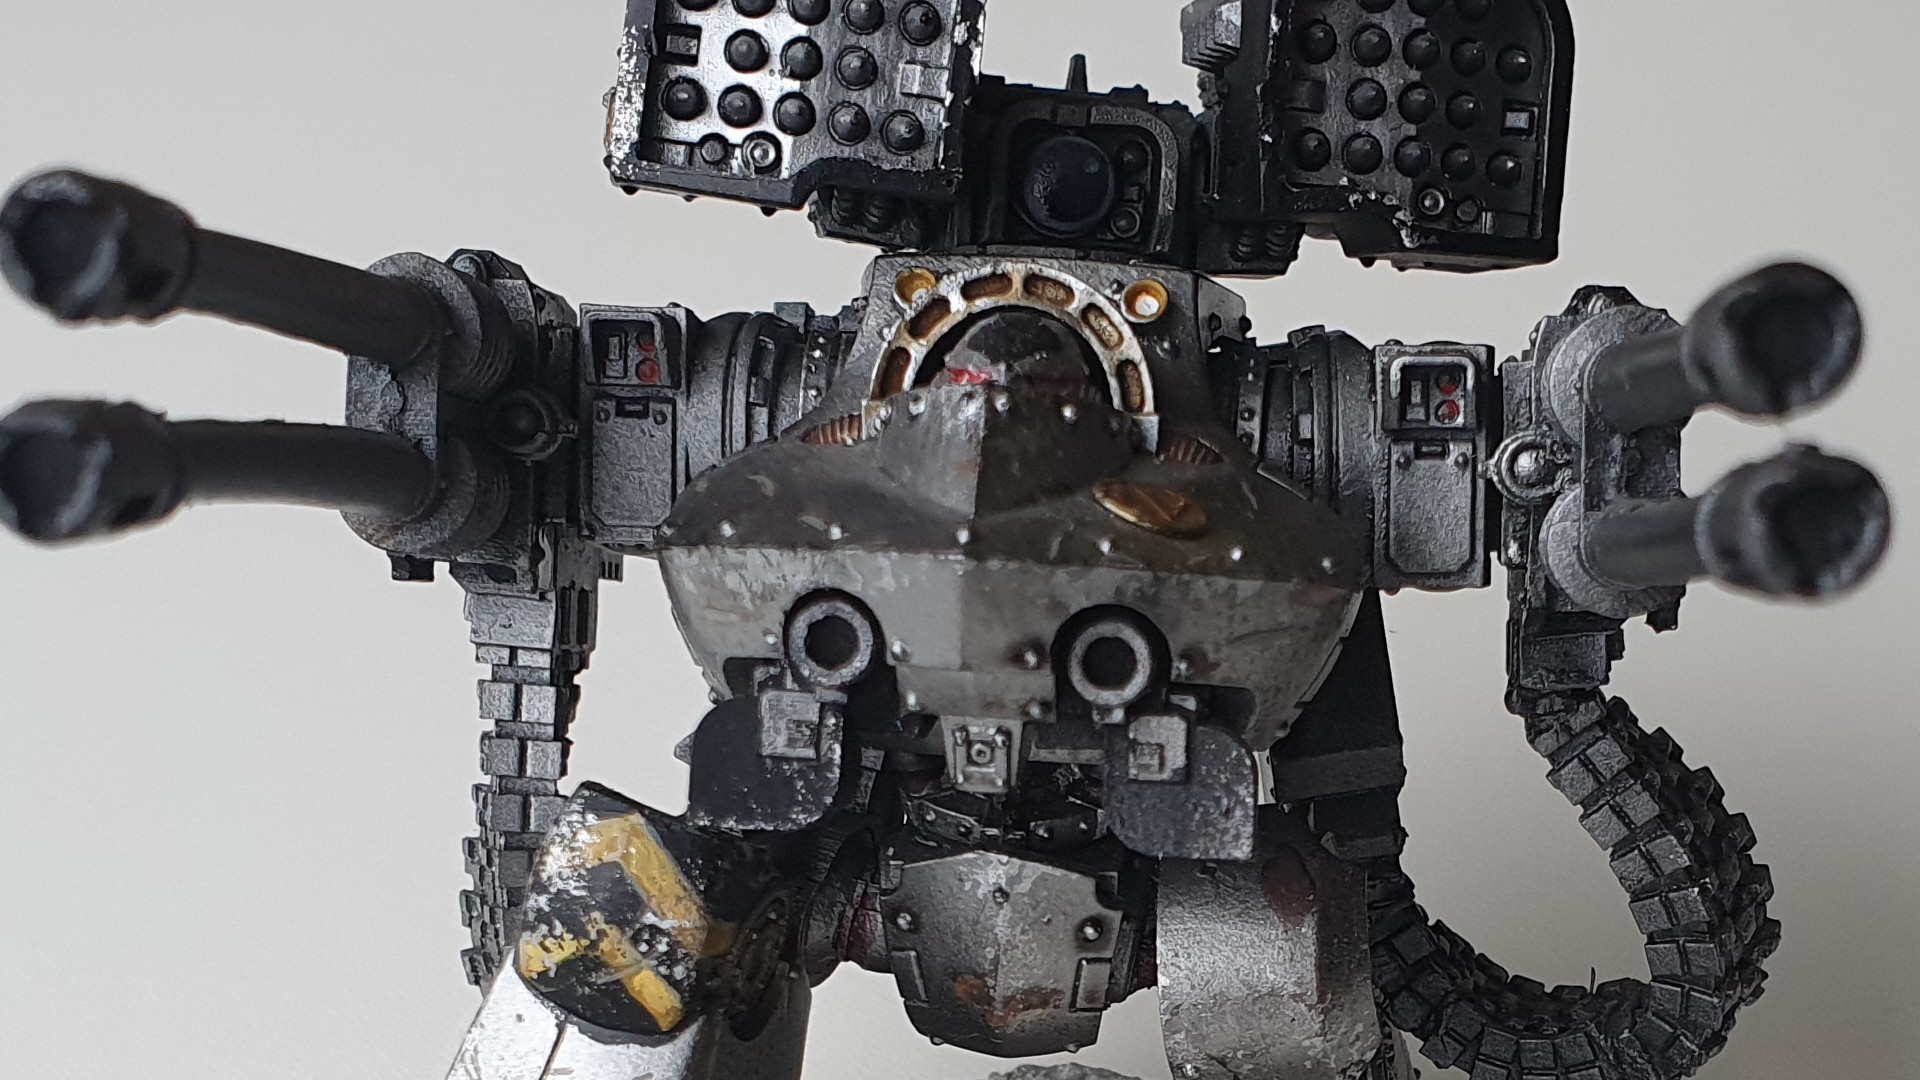 Iron Warriors Deredeo Dreadnought - a walker vehicle with massive shoulder-mounted cannons and back-mounted rockets